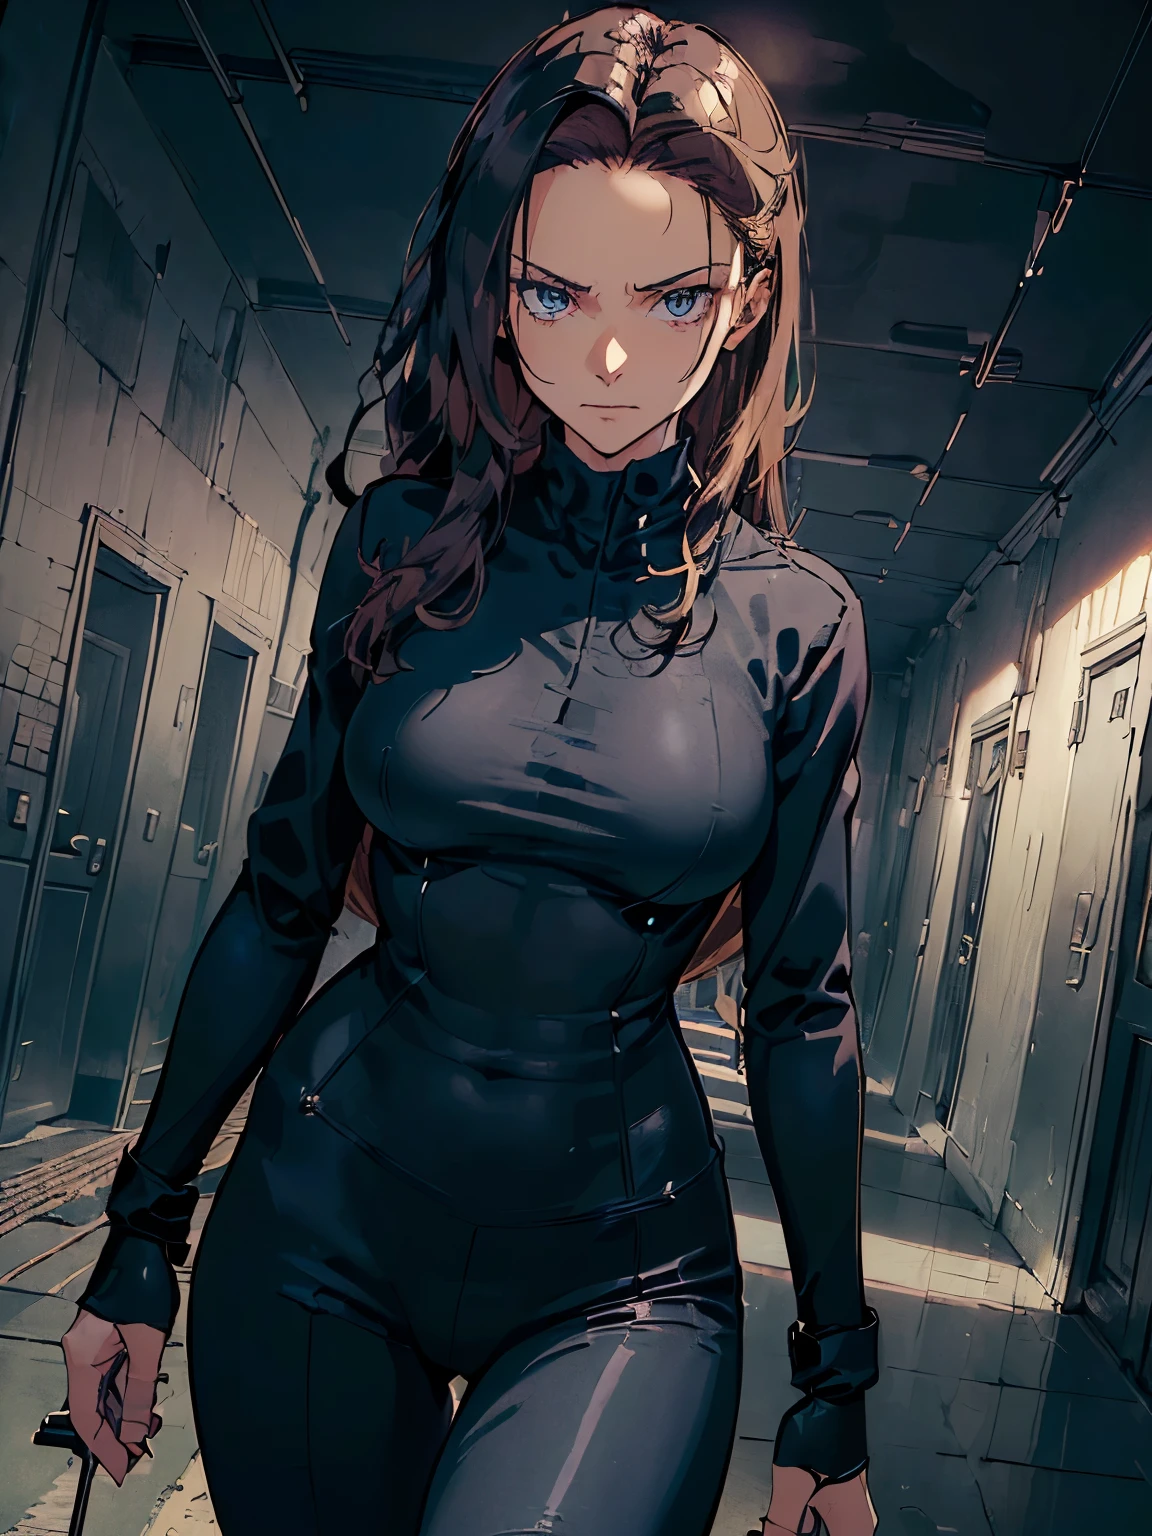 ((( masterpiece ))) ((( background : evil lair : high tech equipment : hallway : a couple of guards ))) ((( character : Rebecca : fit body : long smart hair : black skintight spy suit : hiding behind a wall : hiding from guards : serious : holding a gun : spying )))